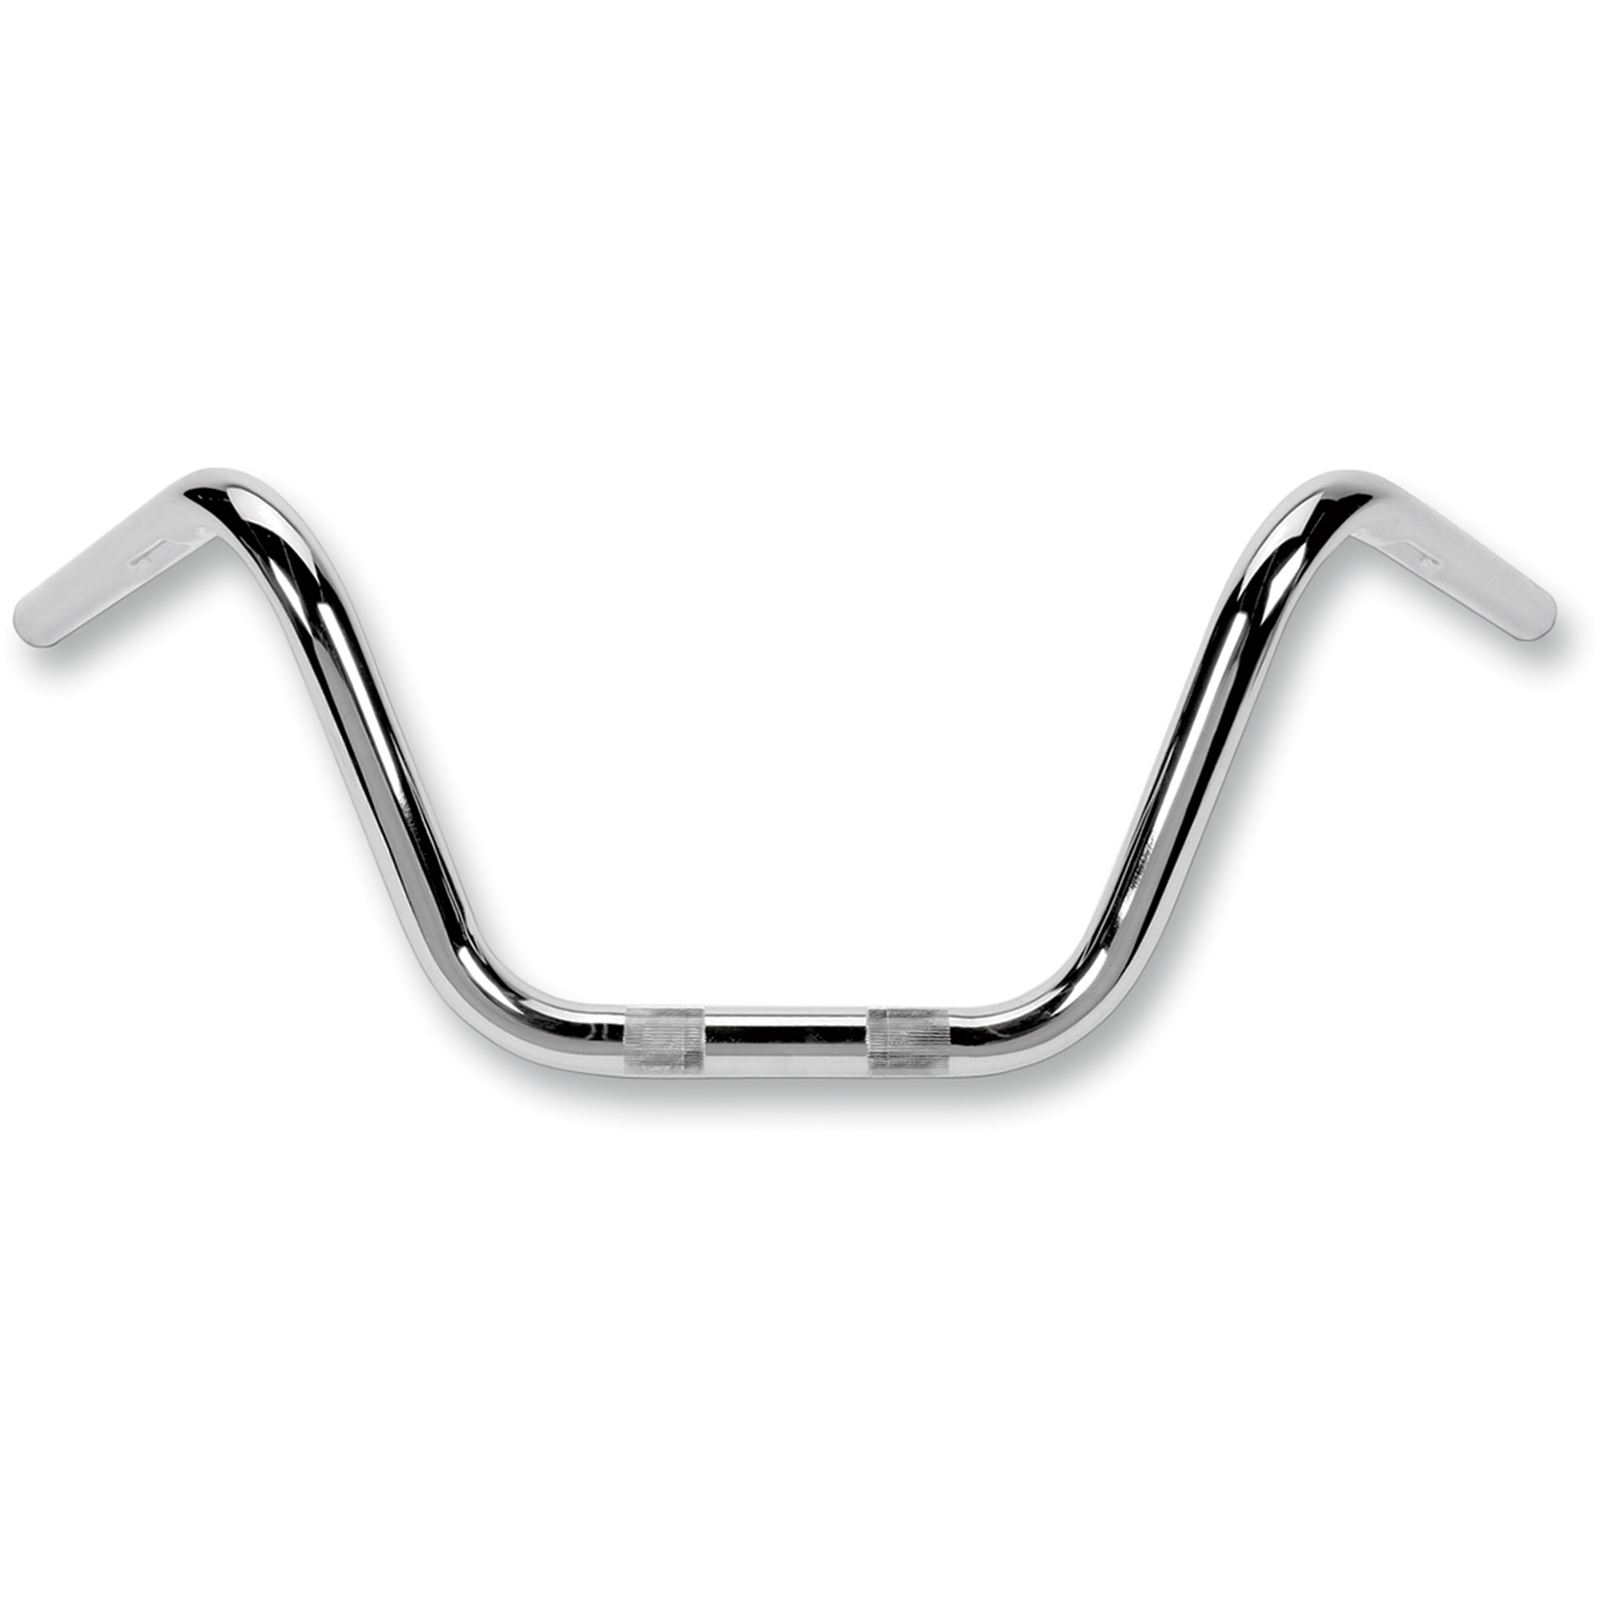 Flanders Chrome FX Standard Handlebar for Throttle-by-Wire